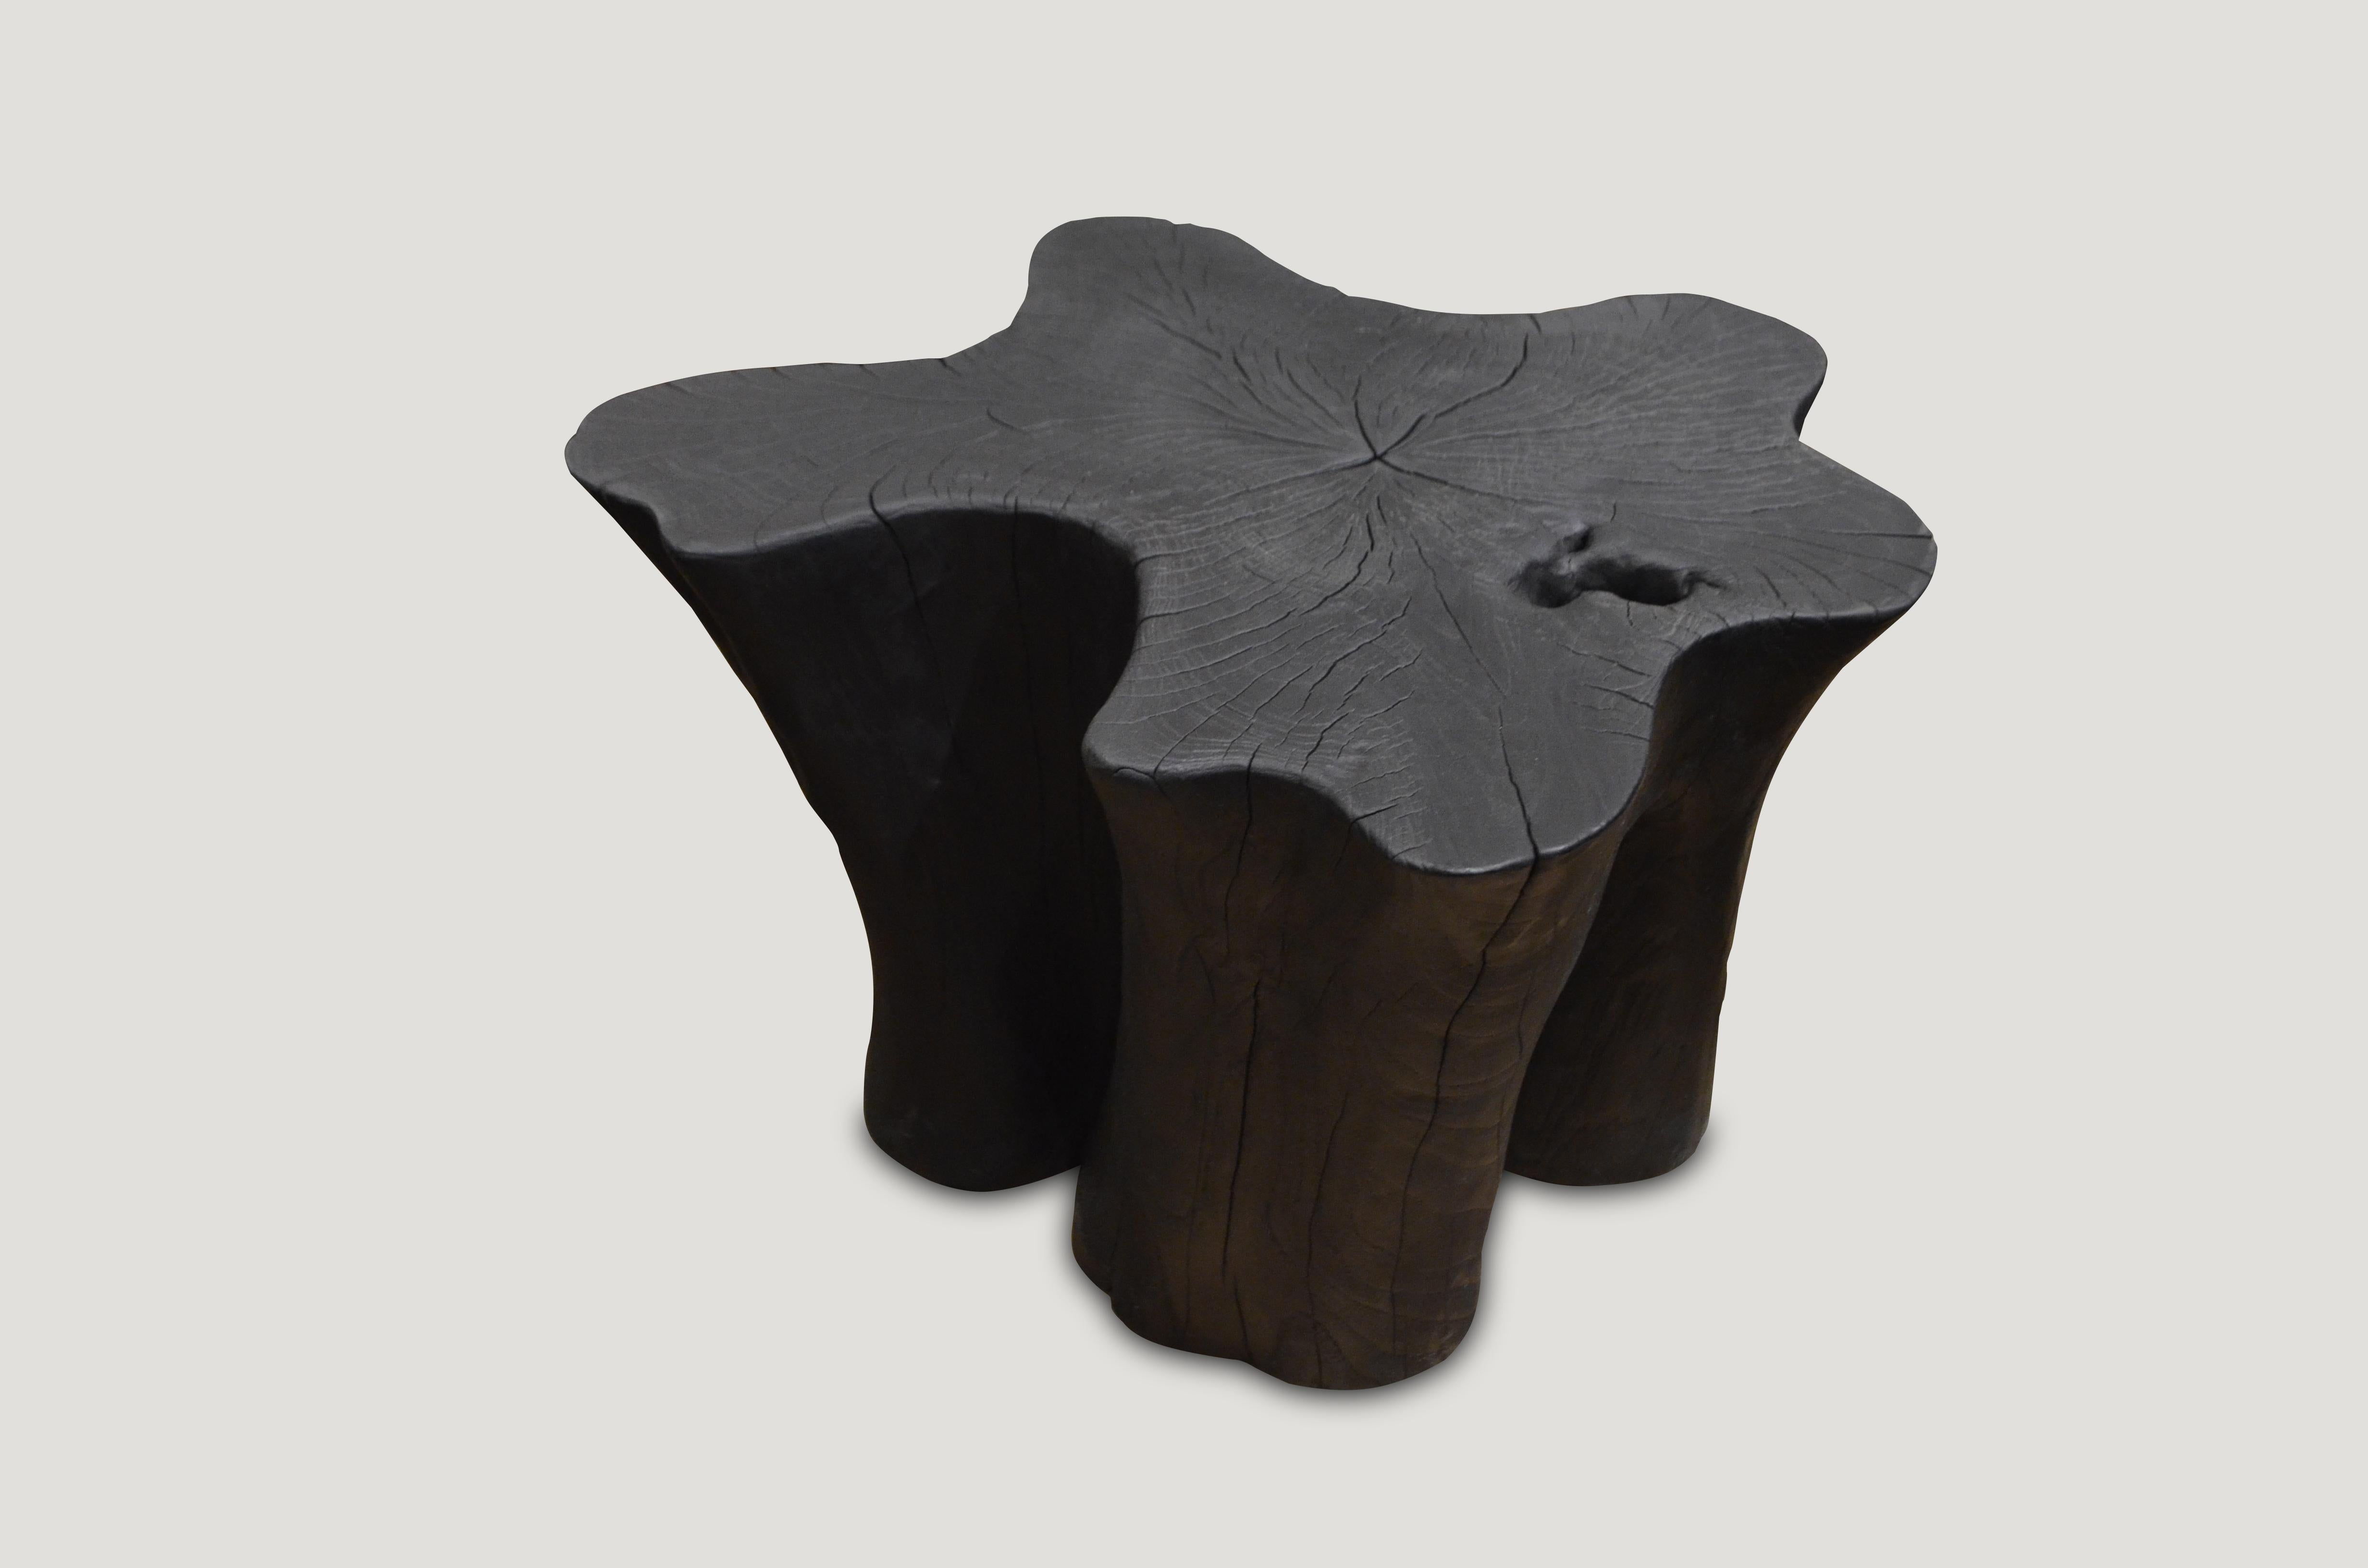 Side table burnt, sanded and sealed leaving the grain of the wood exposed.

The Triple Burnt collection represents a unique line of modern furniture made from solid organic wood. Burnt three times to produce a rich, charcoal finish with impressive